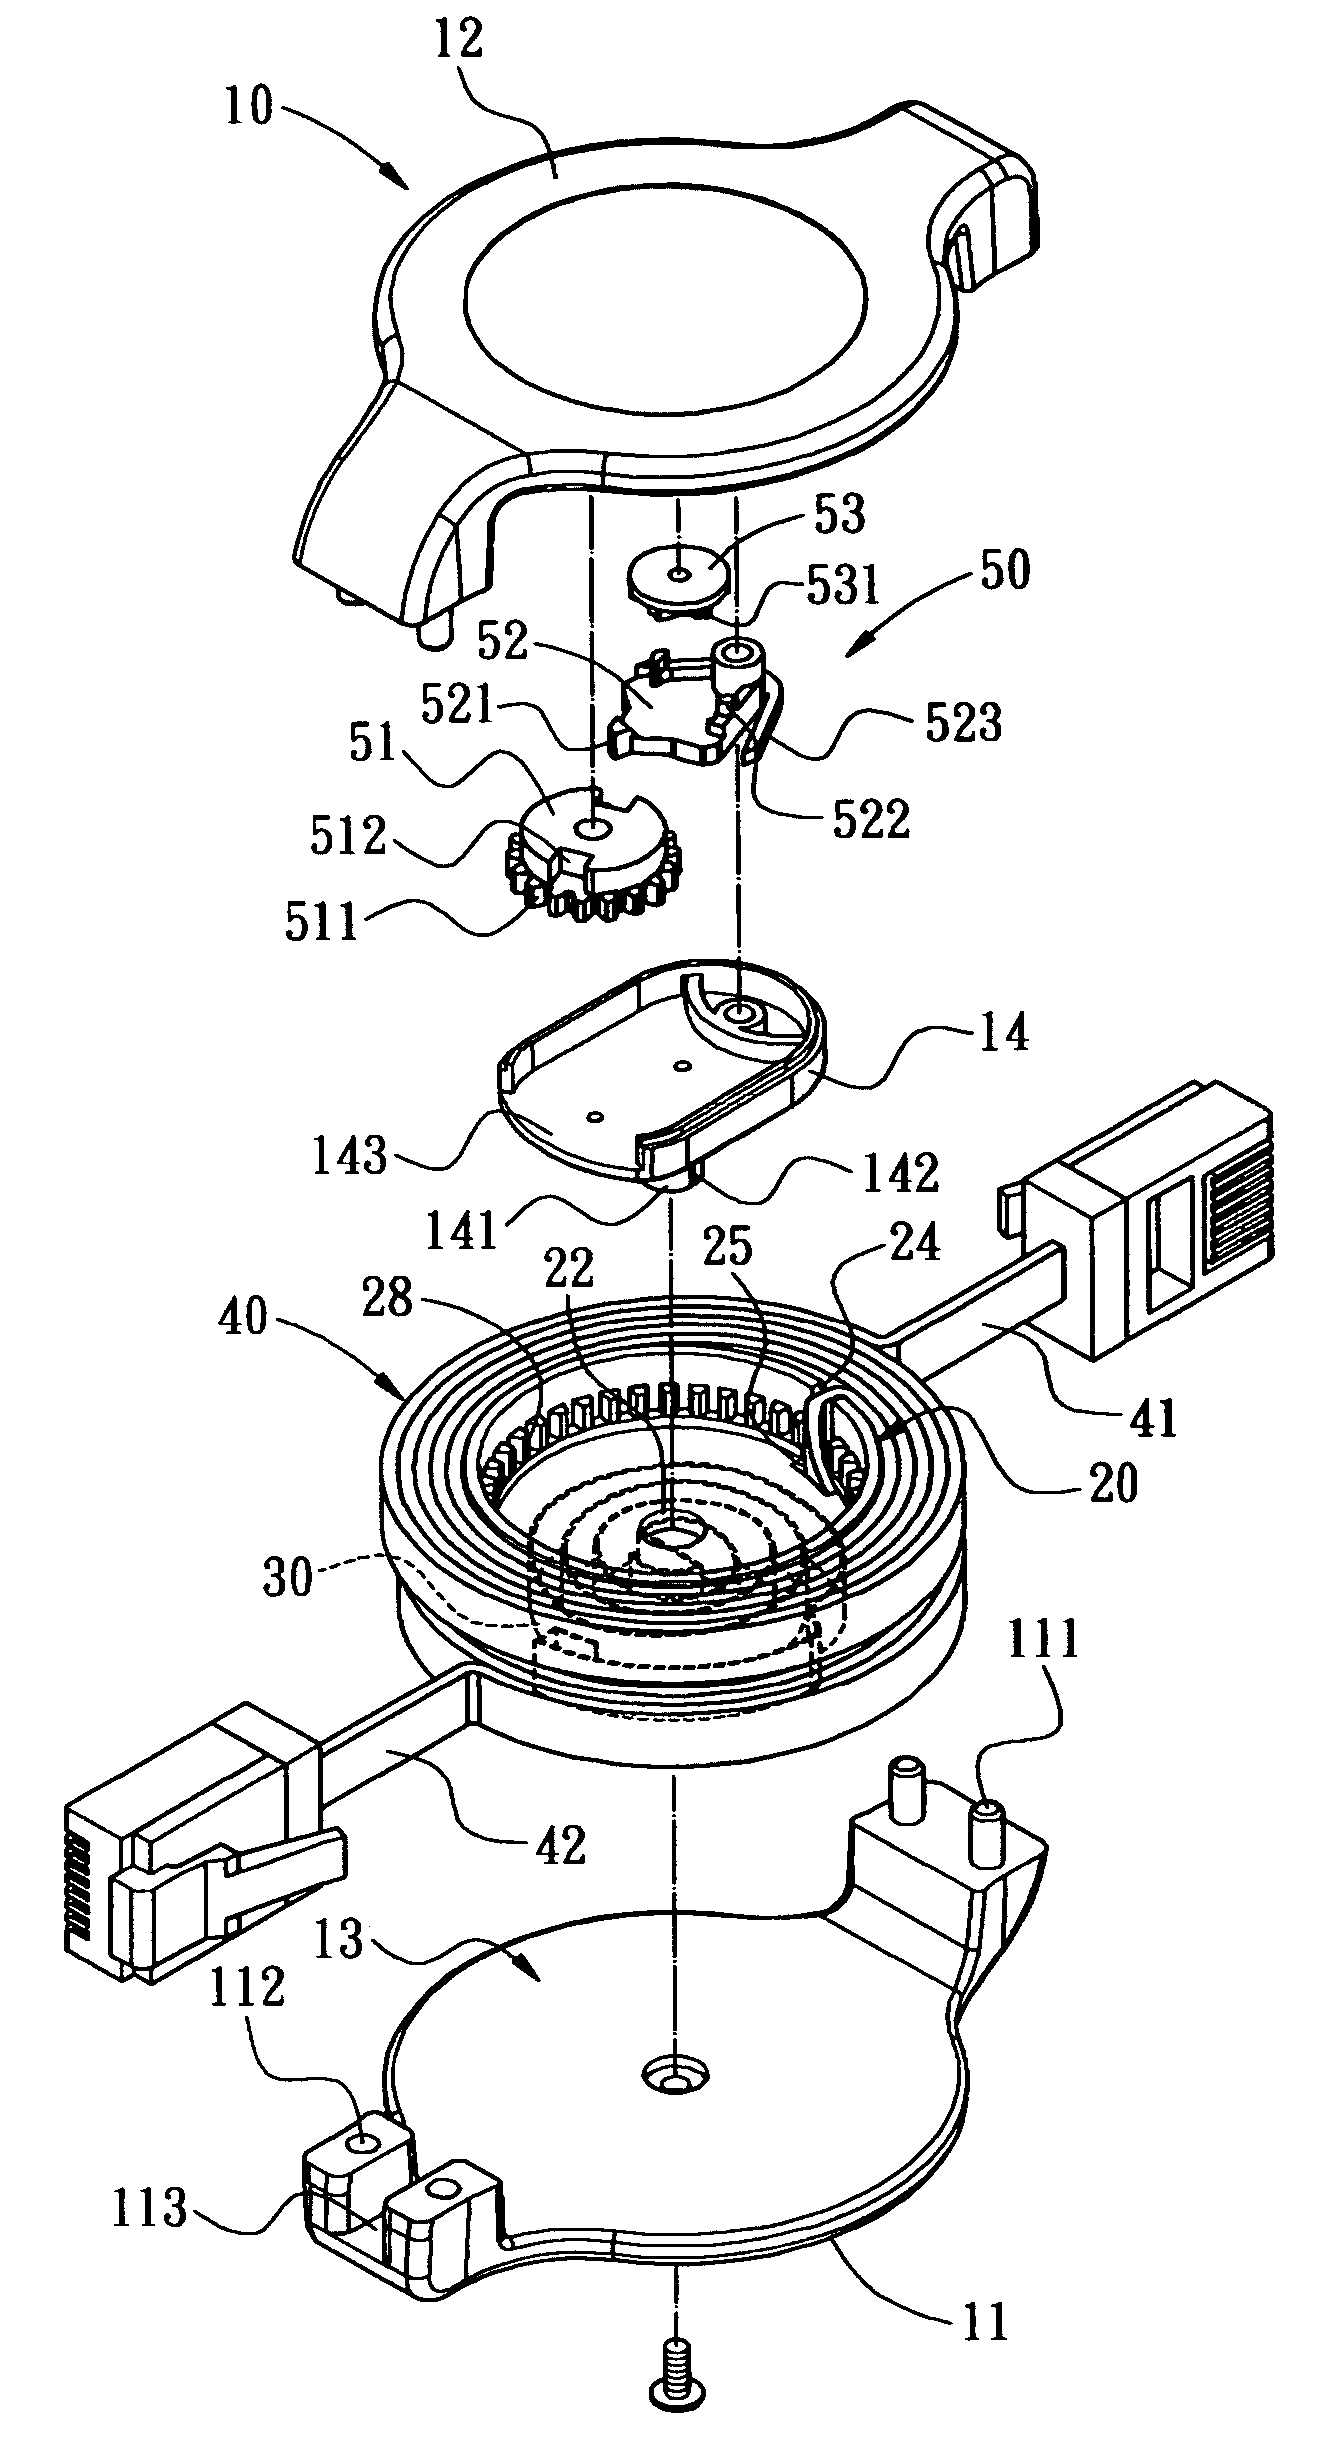 Cable winder apparatus